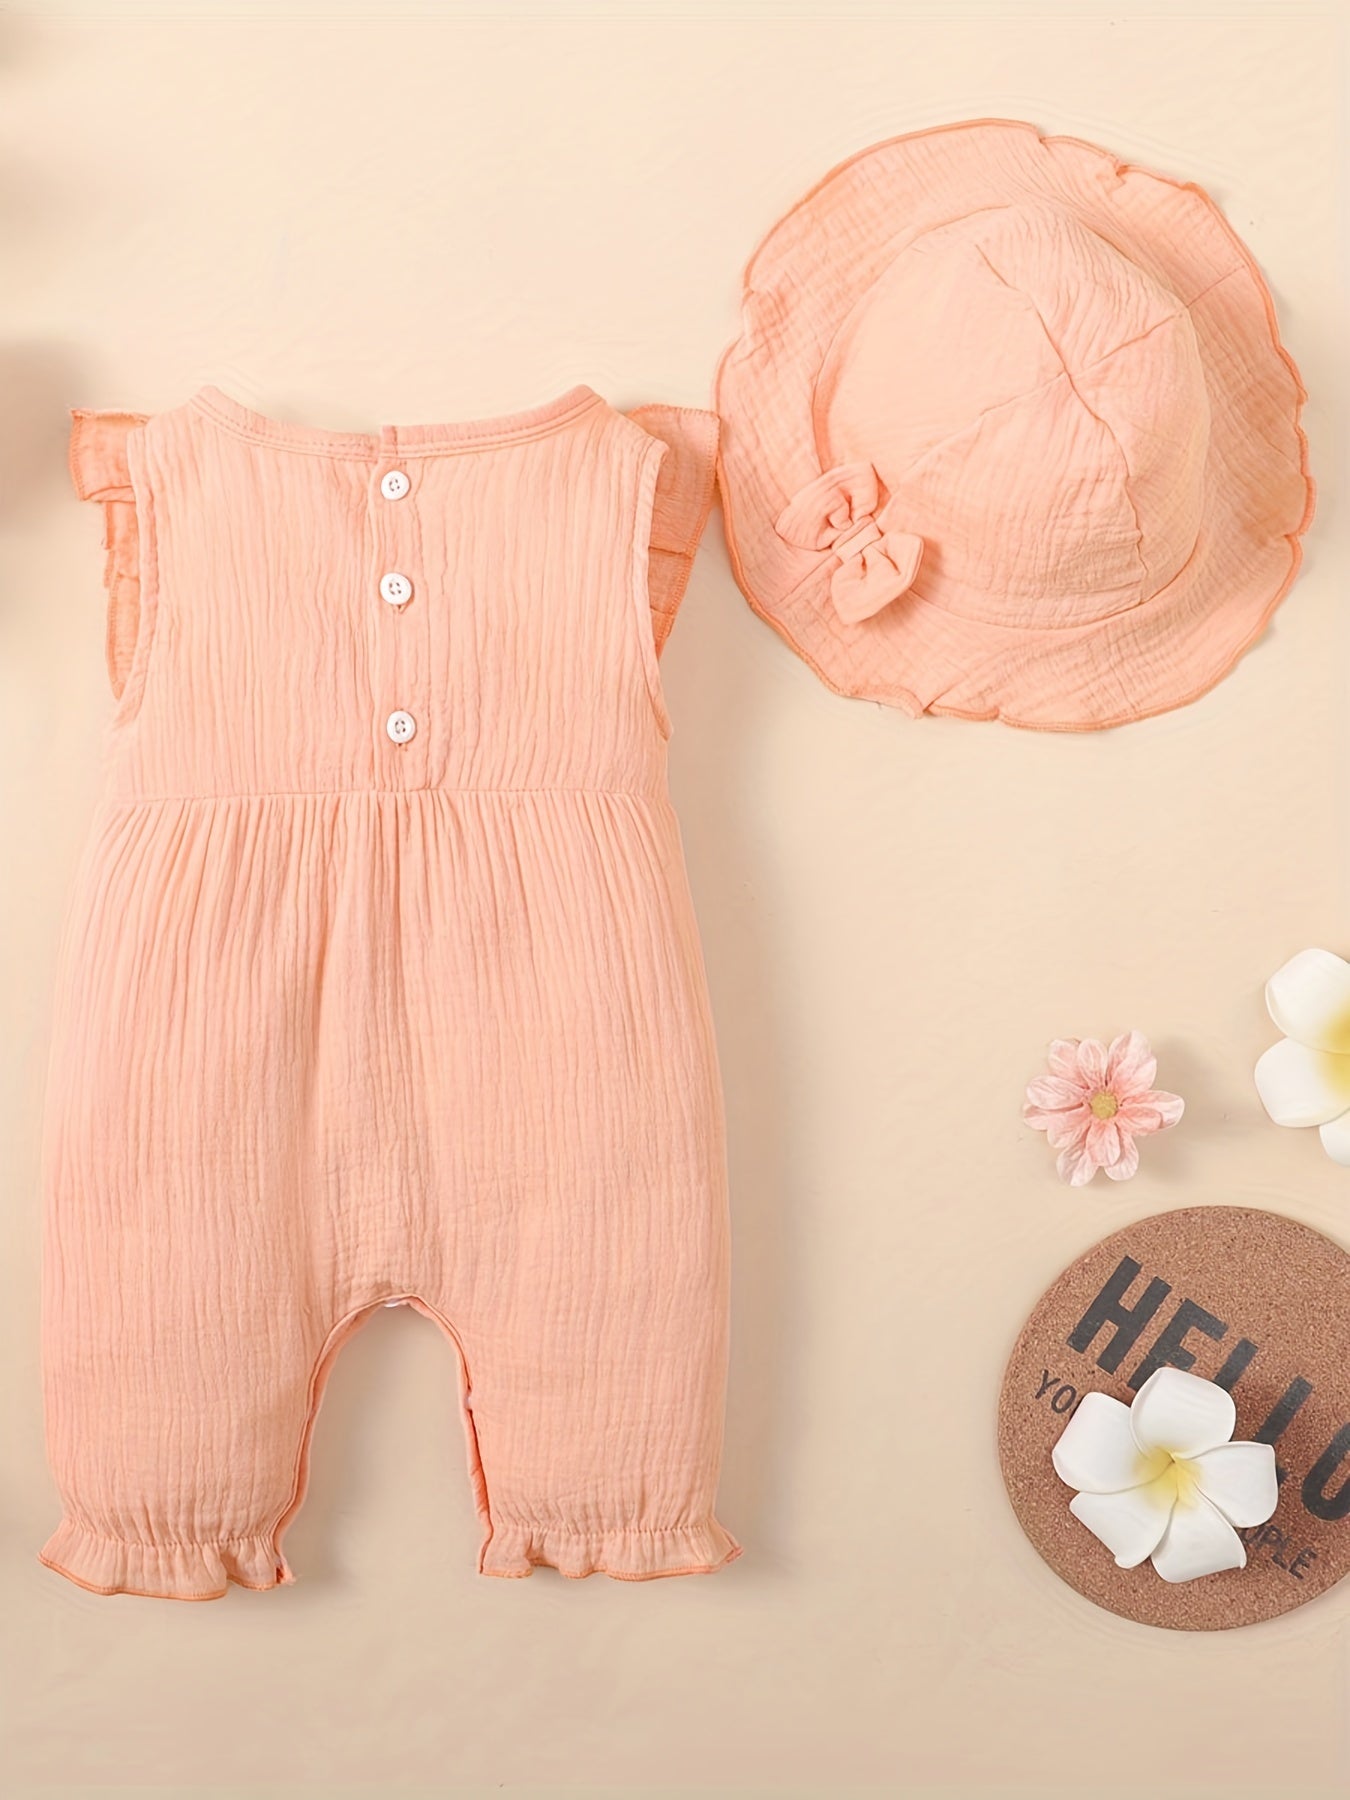 Stay Cool In Summer: 2pcs Baby Girl's Cotton Romper With Hat Set